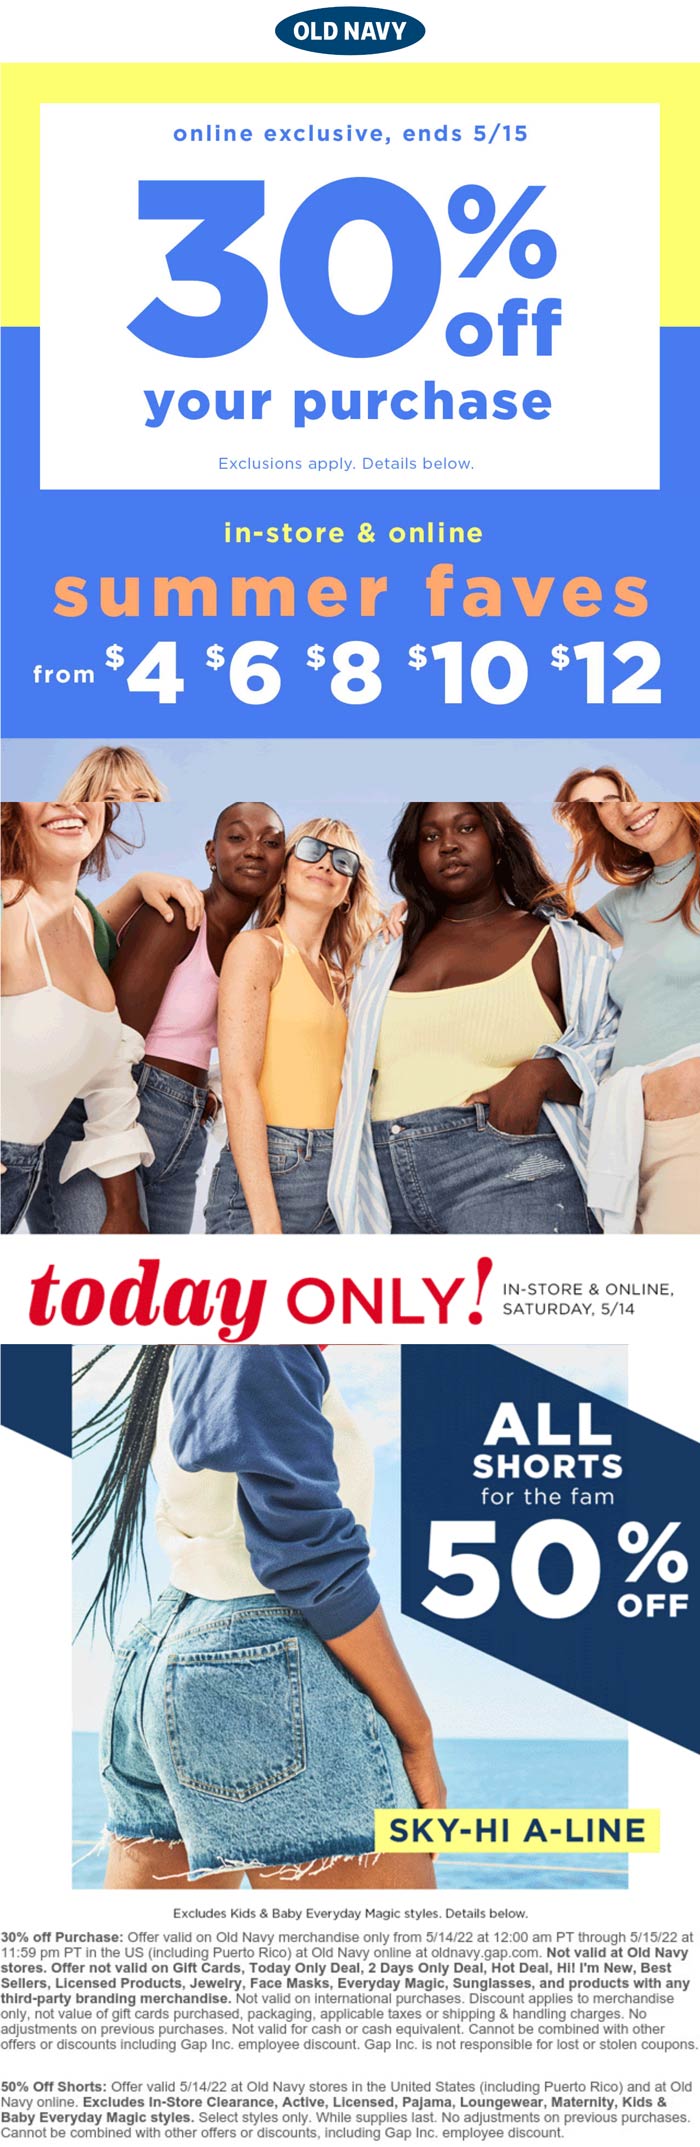 Old Navy stores Coupon  30% off everything & 50% off shorts at Old Navy #oldnavy 